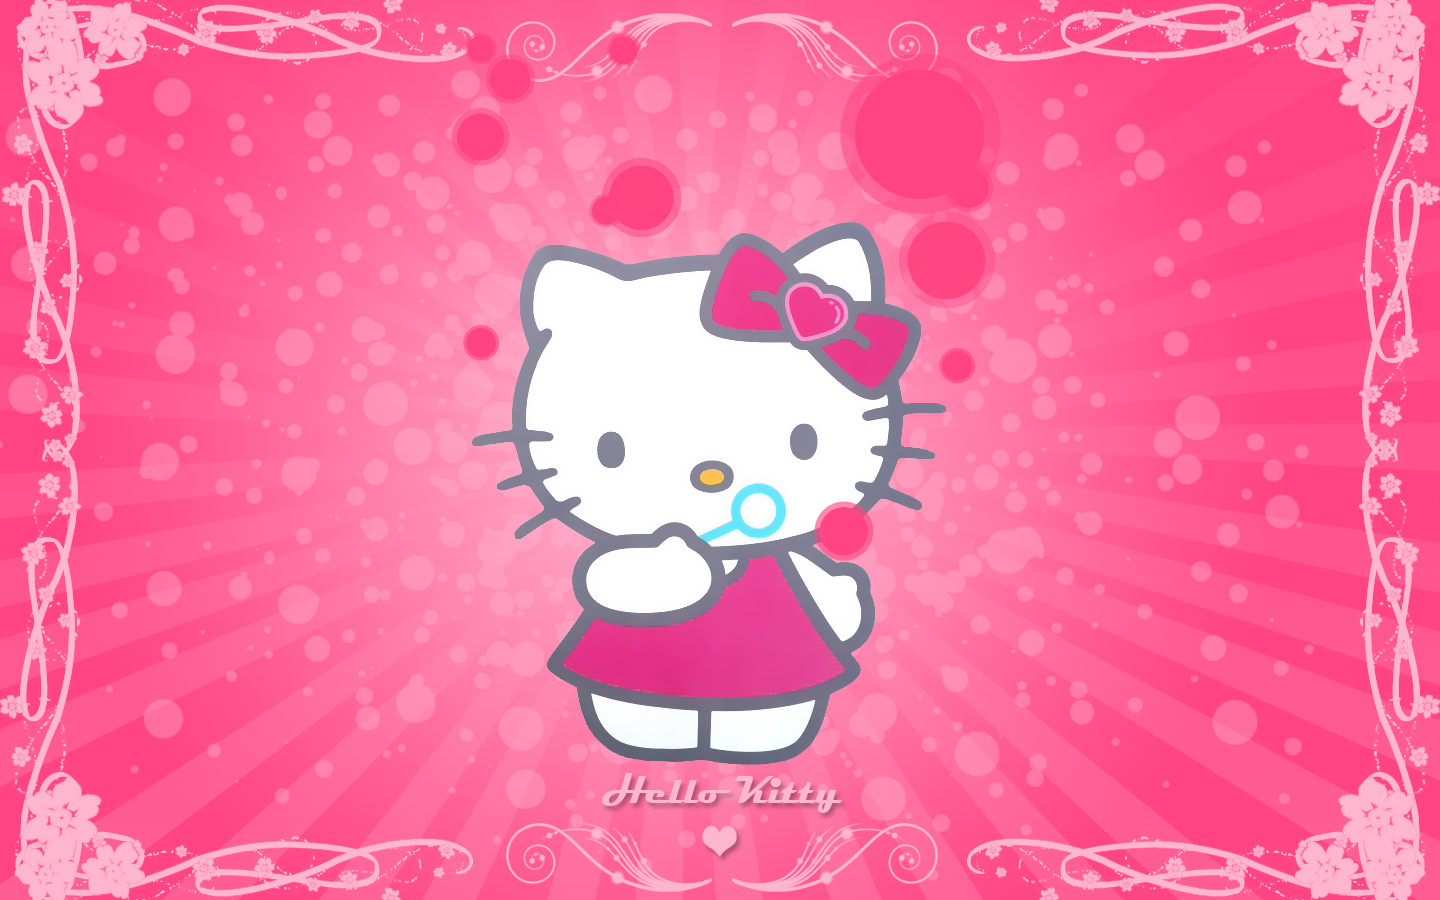 Cute Kitty with Retro Background